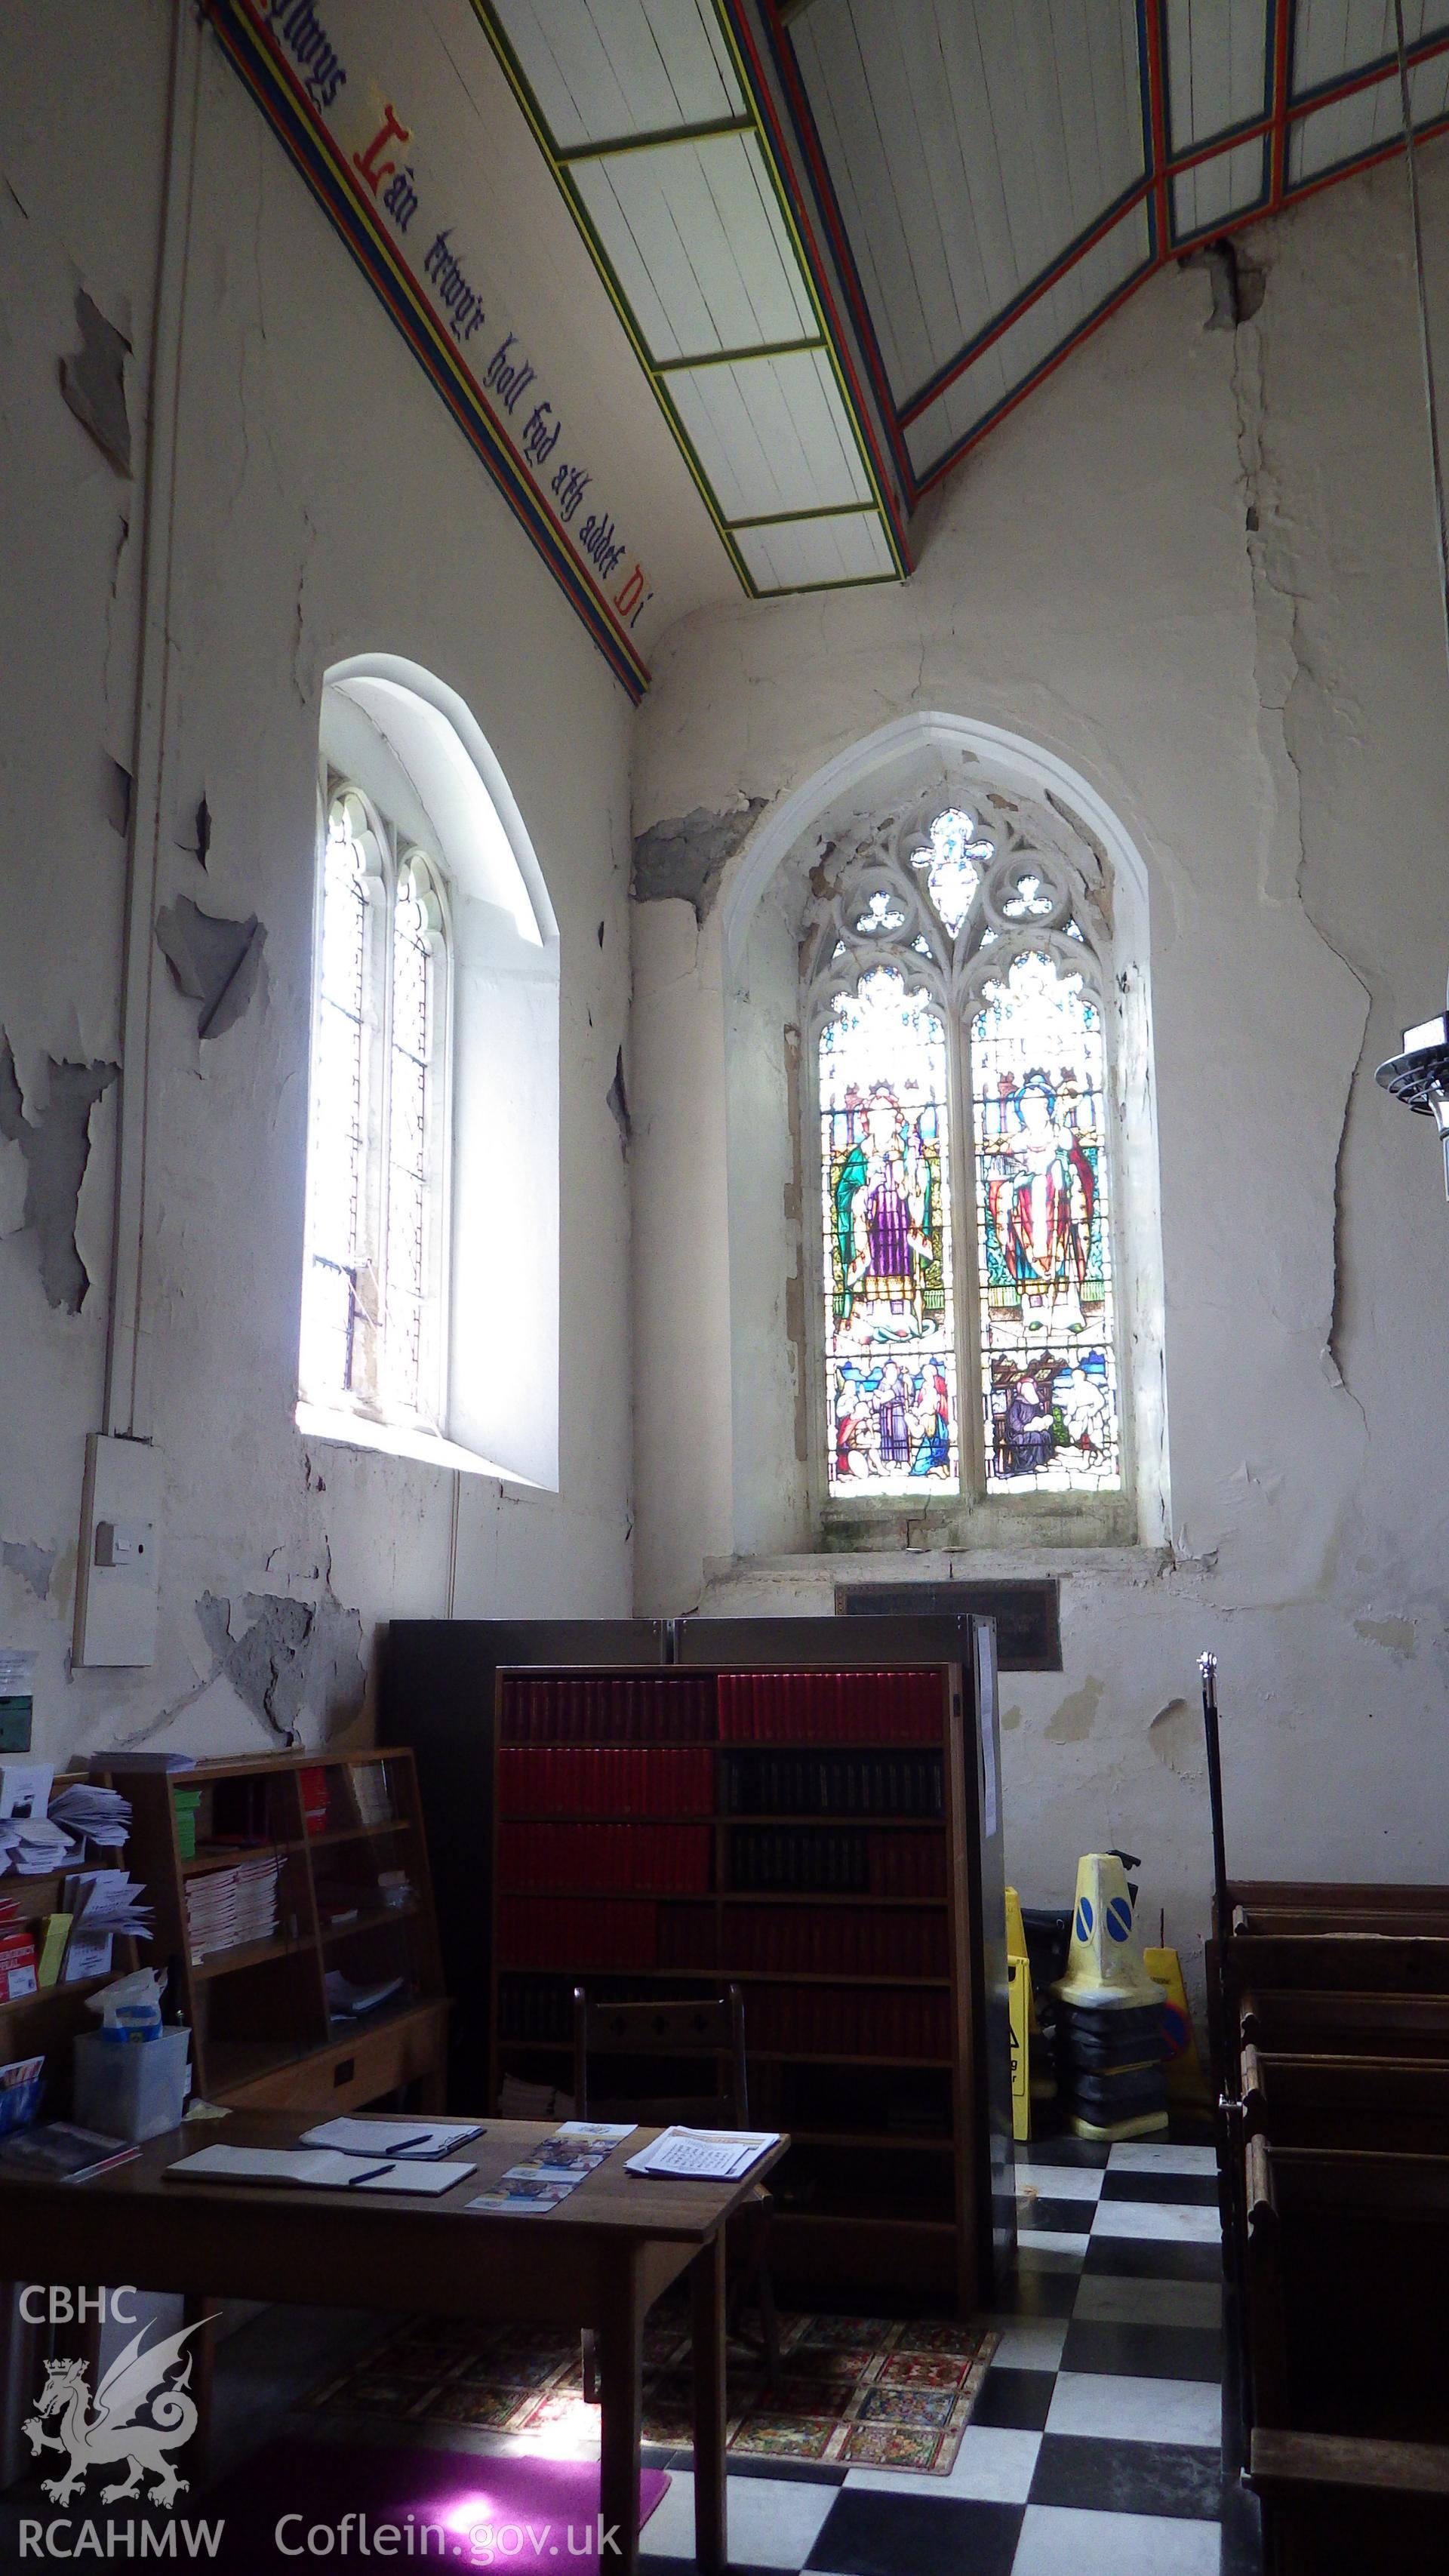 Water damage and cracking at western end of nave, southwest corner, also showing detailing of vaulted roof